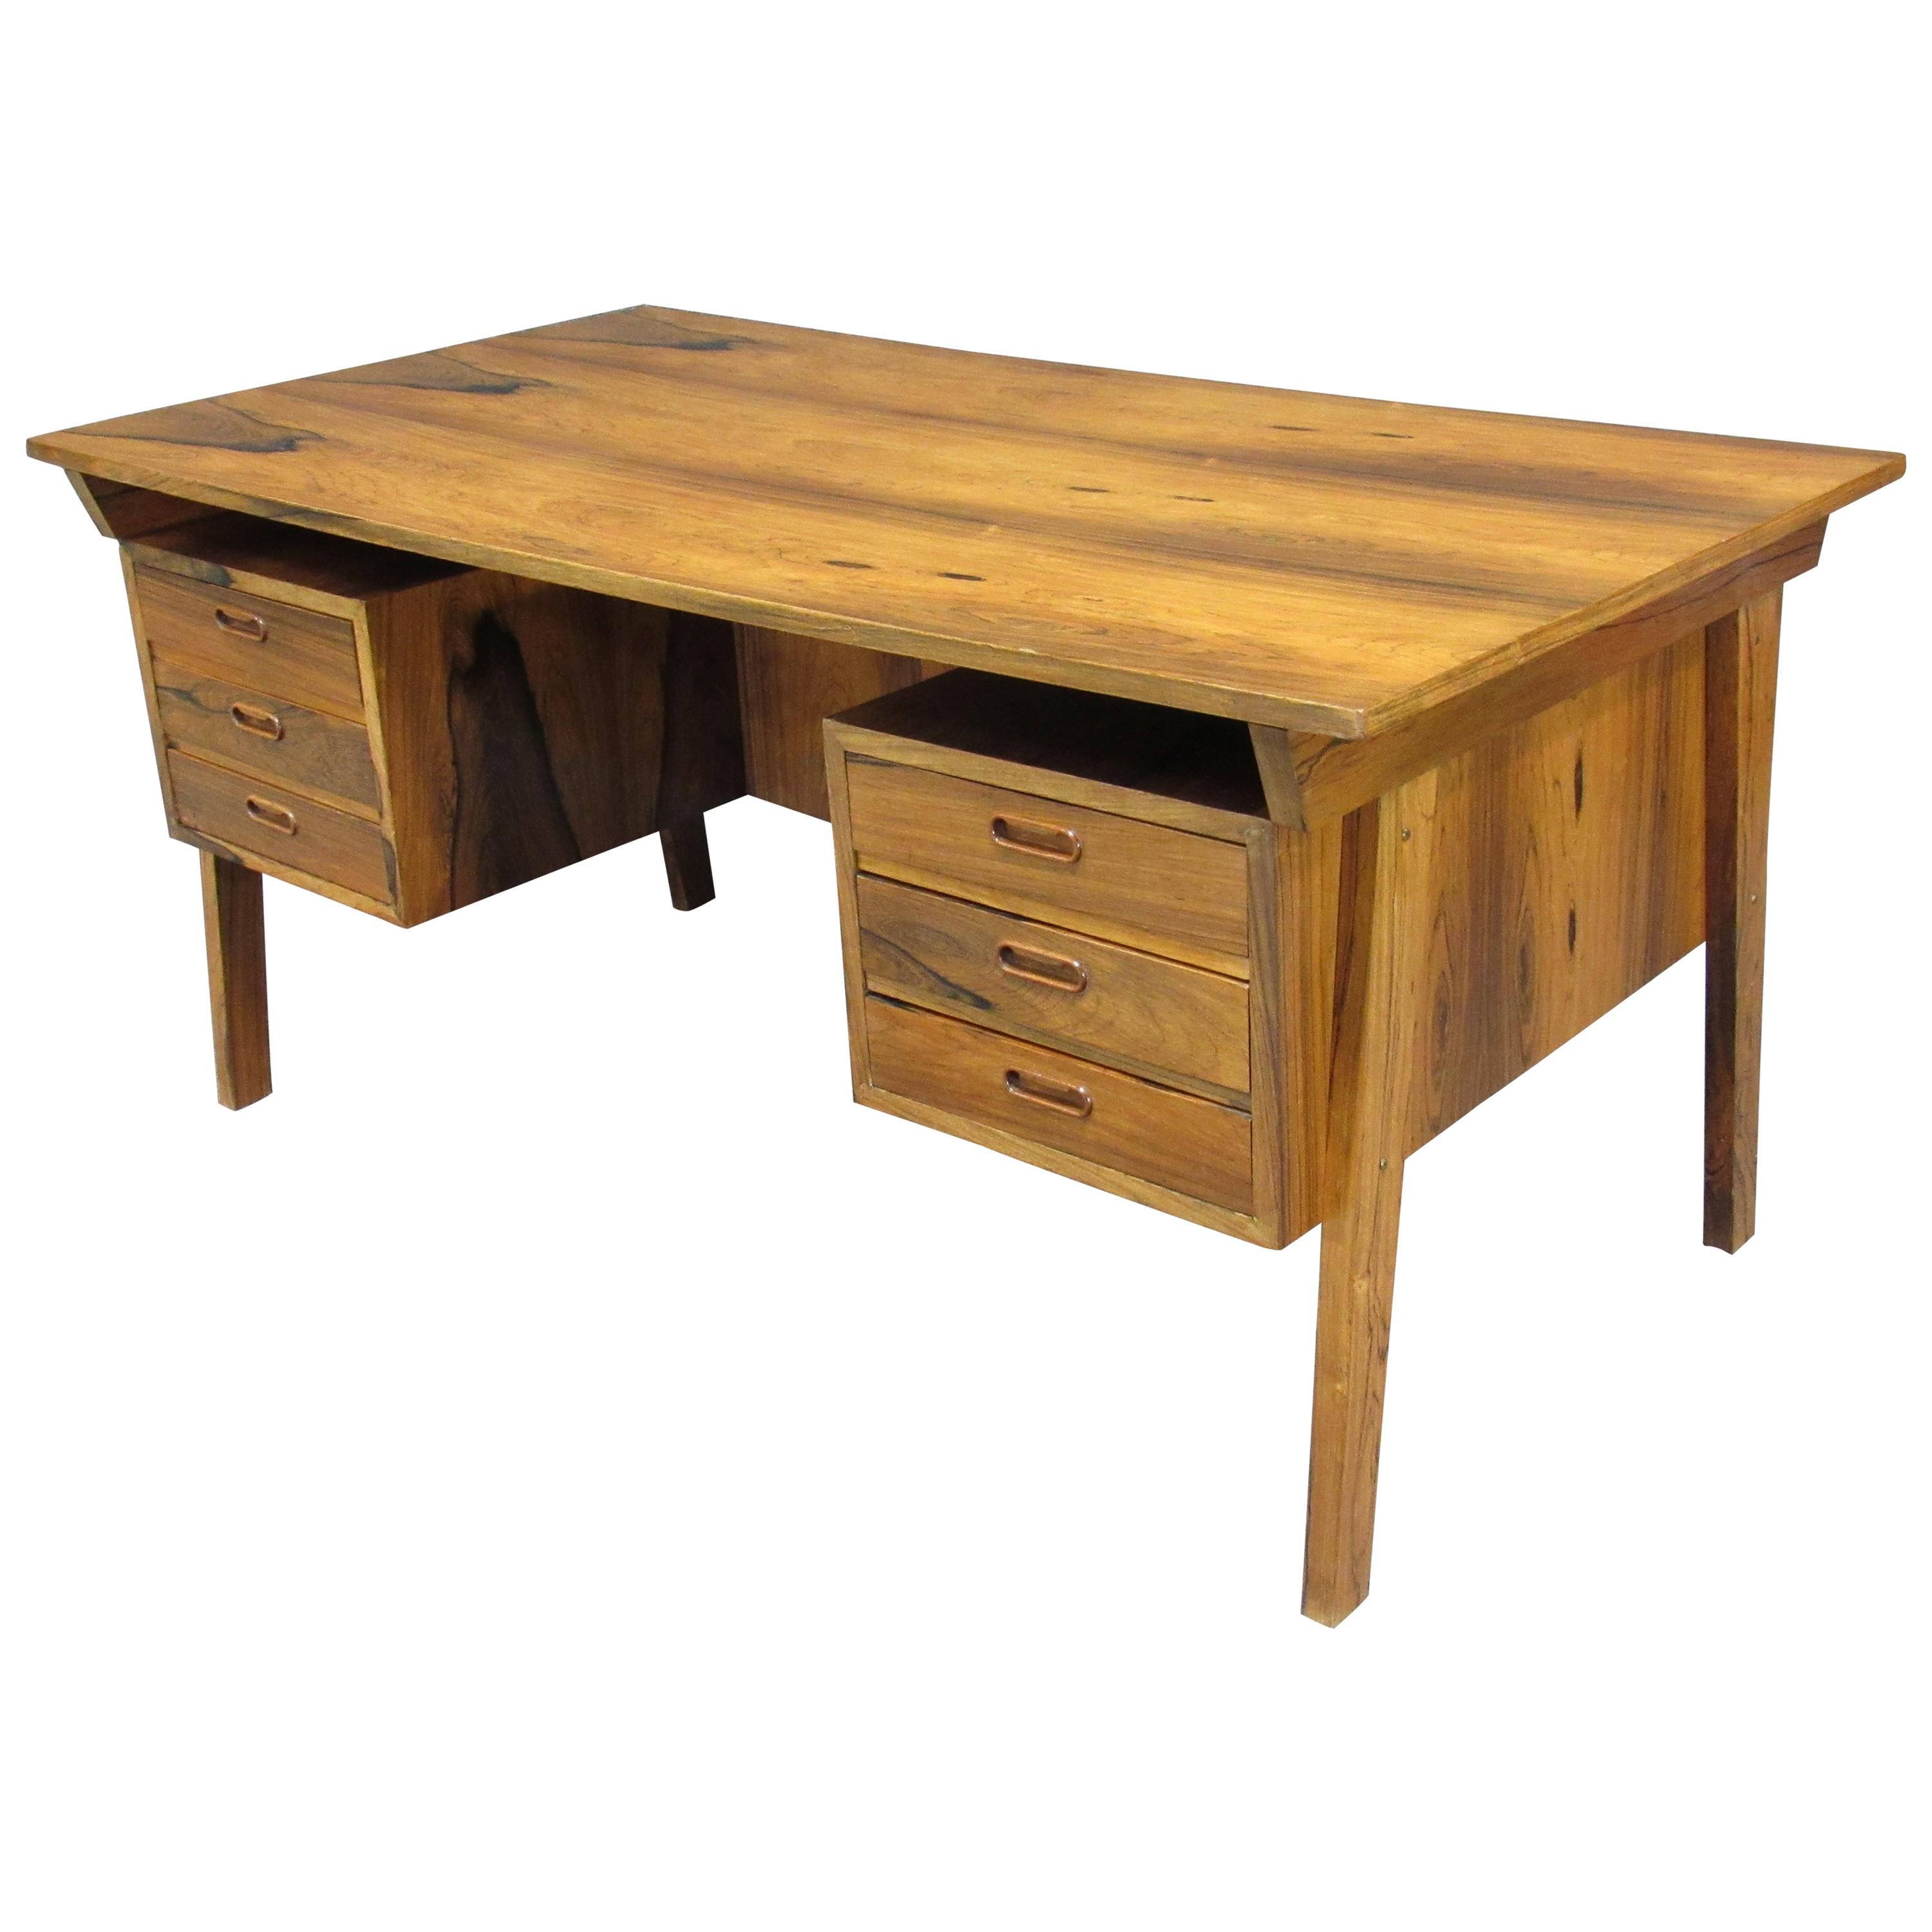 Midcentury Danish Modern Desk Crafted in Dramatically Figured Rosewood